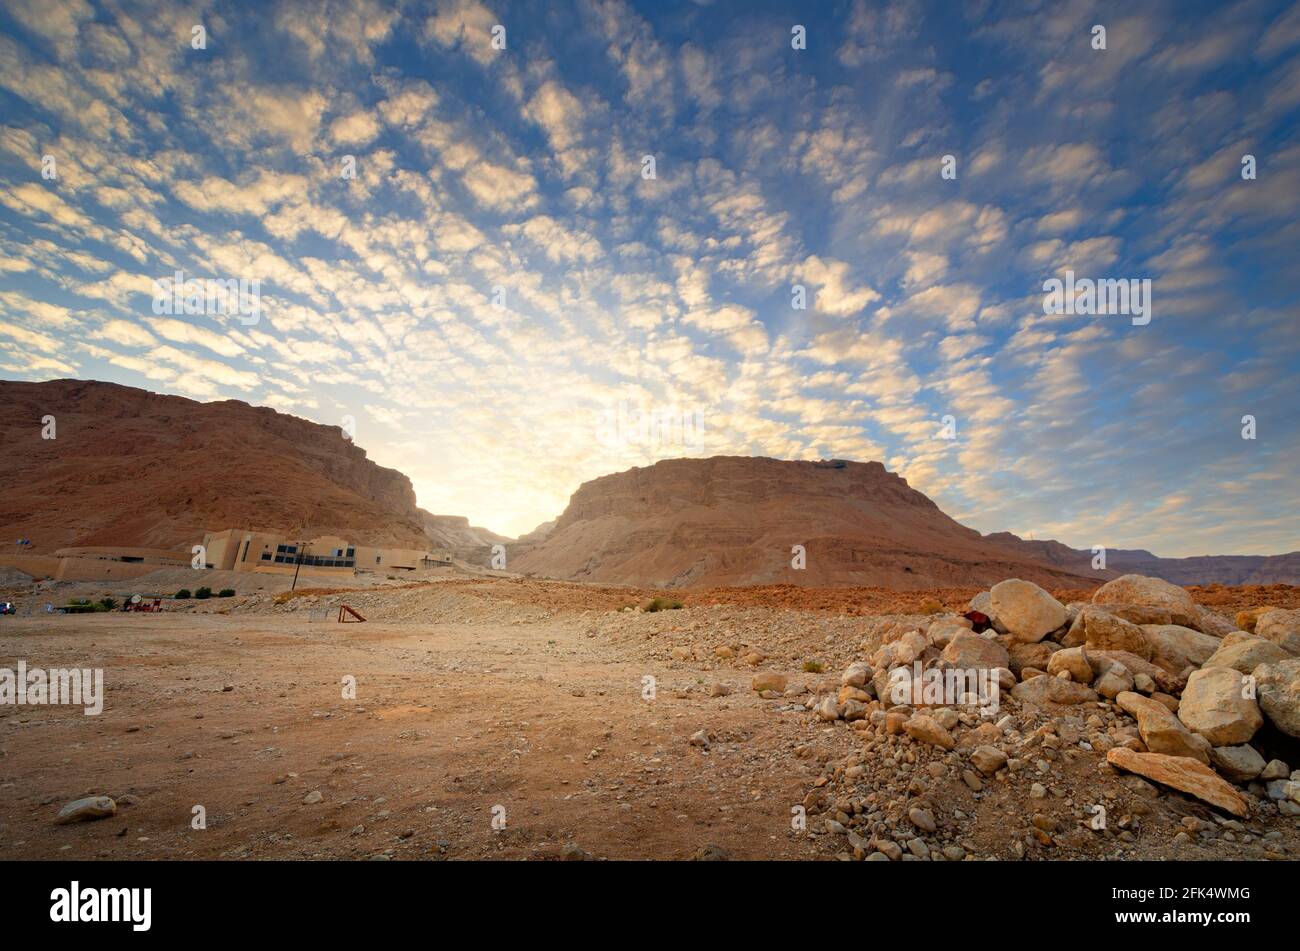 Masada, Israel ancient rock plateau fortress in the Judaean Desert at sunset. Stock Photo